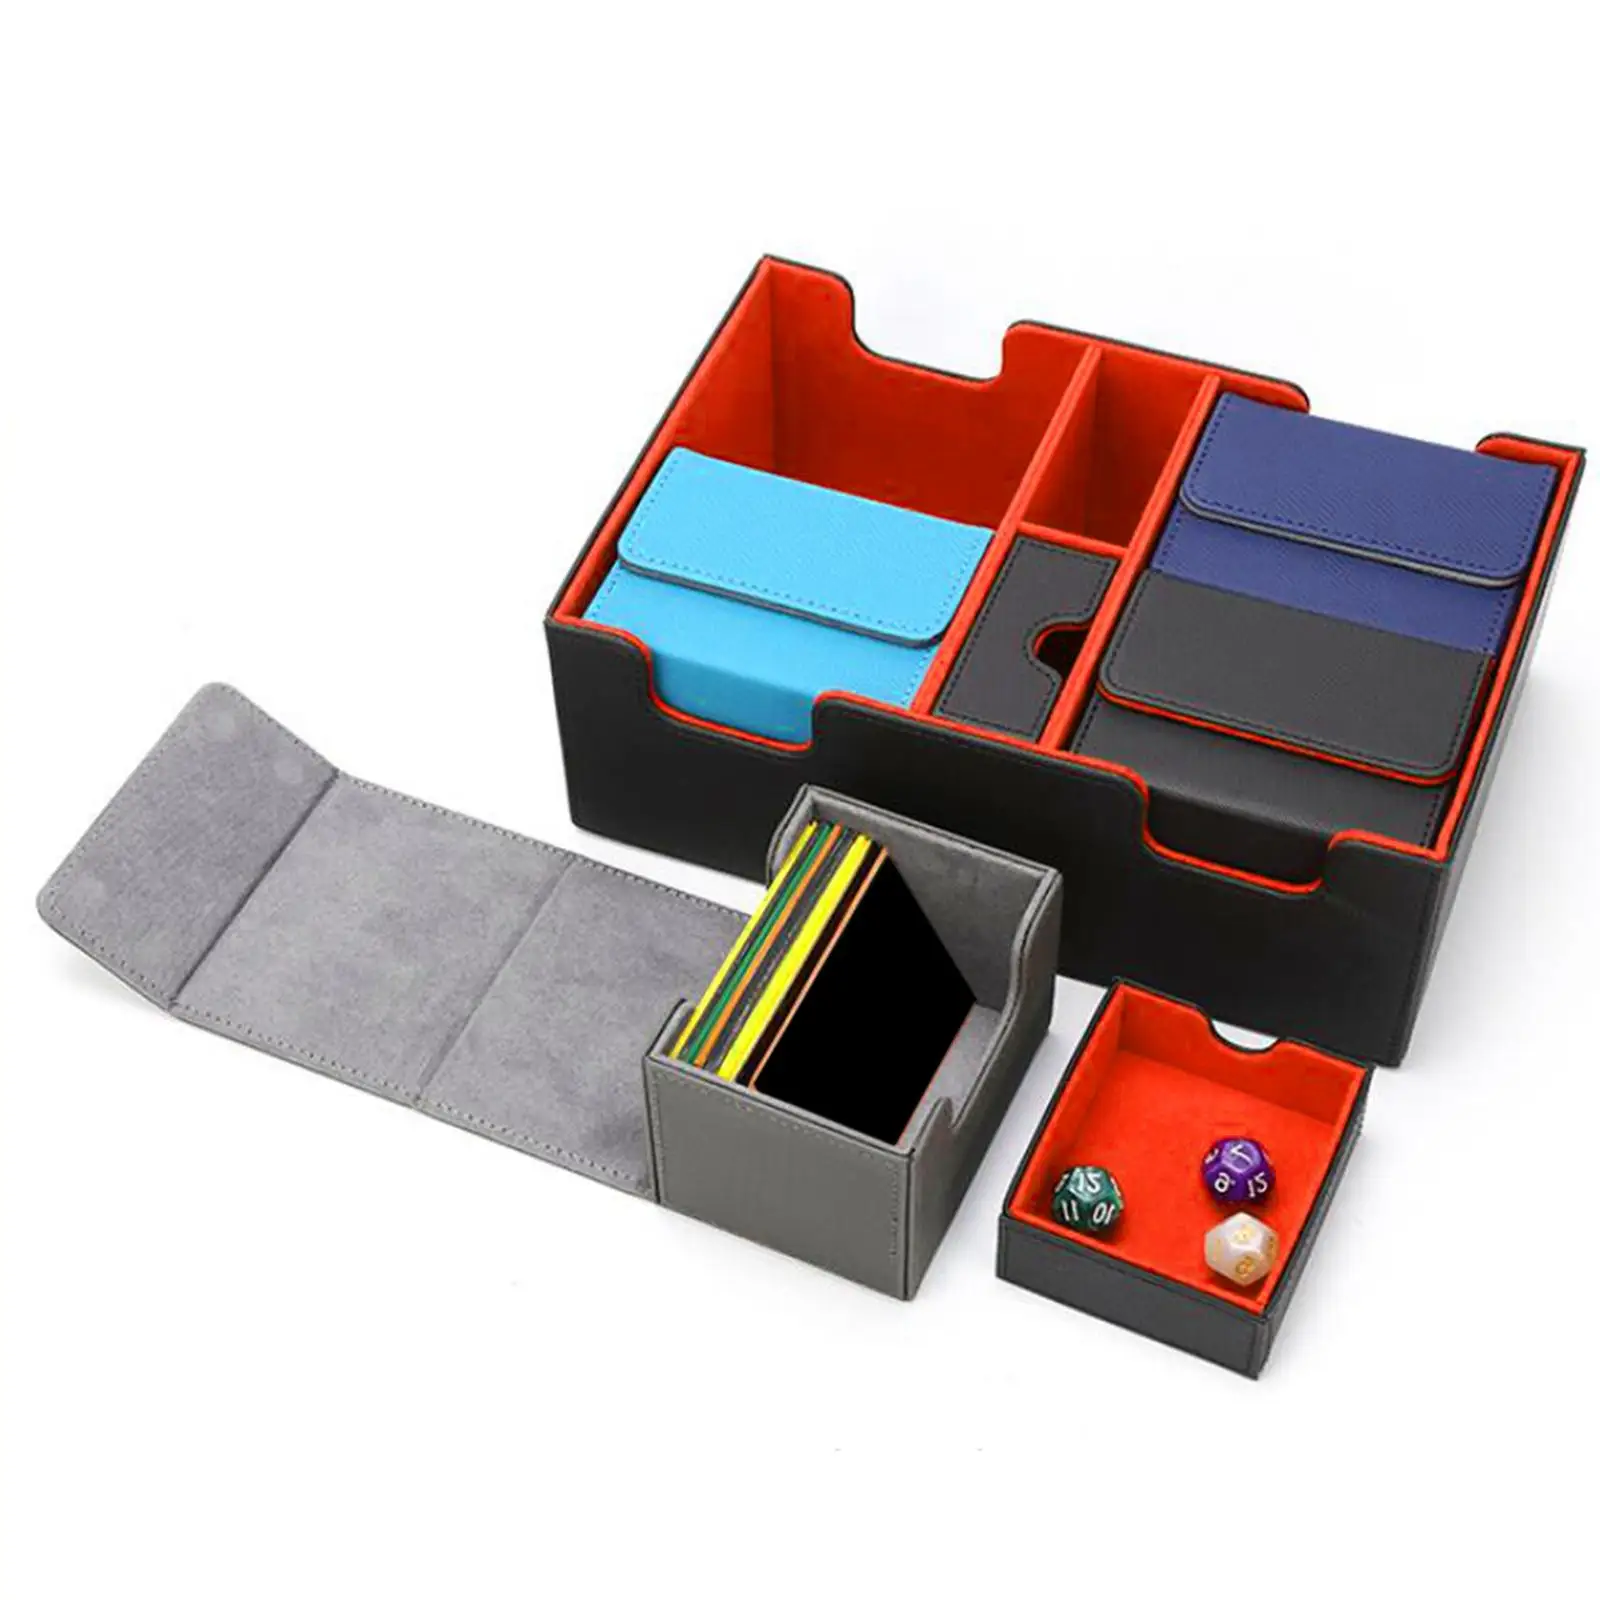 Trading Card Deck Box Large Capacity Fashion Sleeved Card Storage Game Card Protection Organizer for Trading Card Games TCG MTG